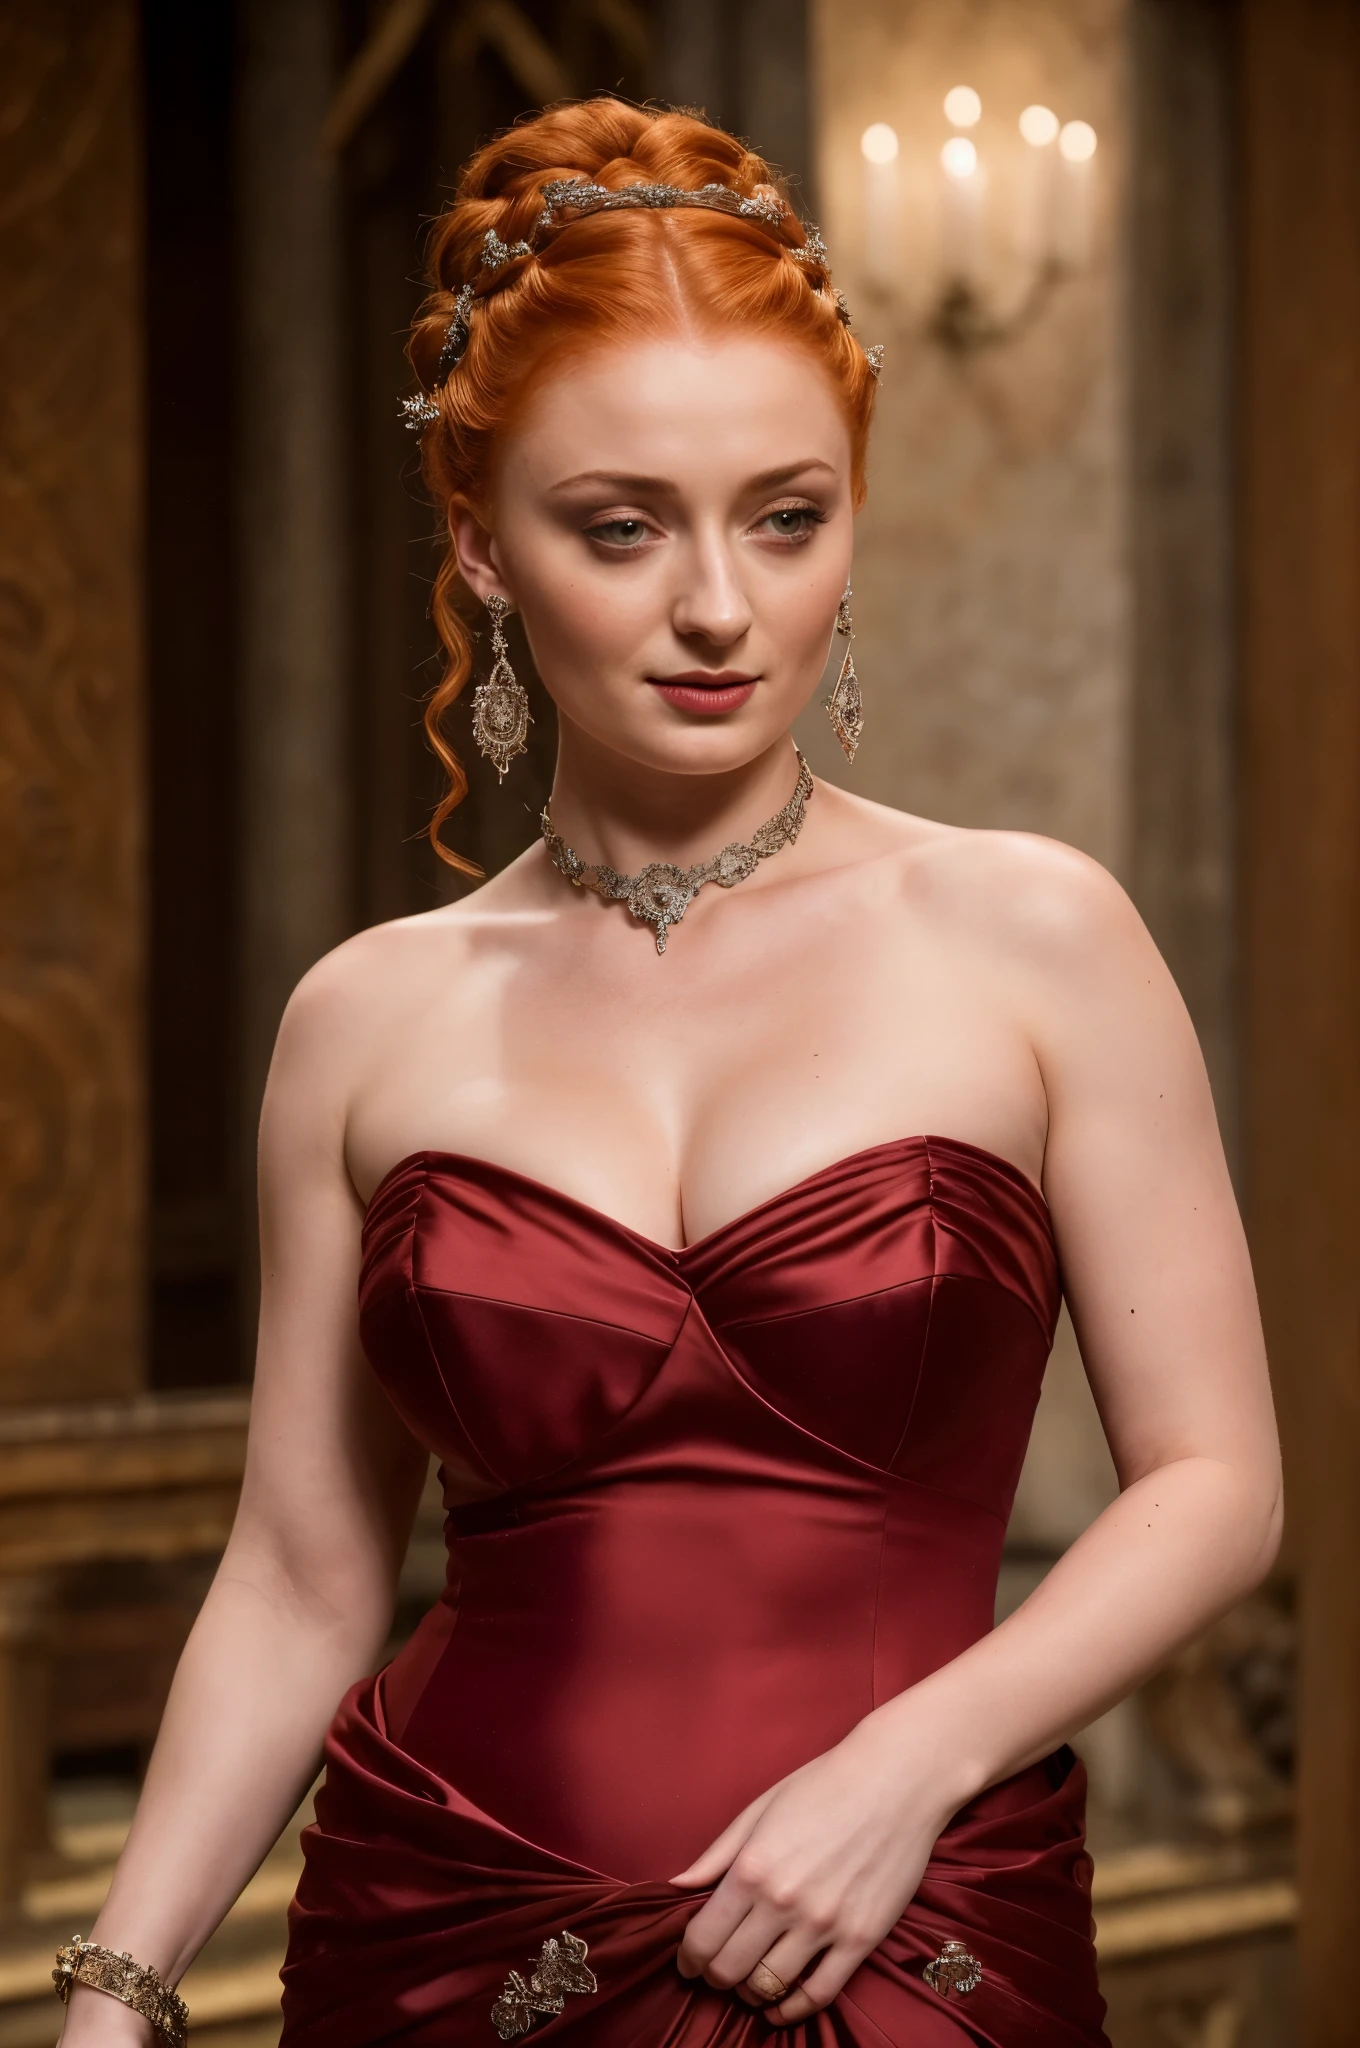 Face of Sophie Turner, Sansa Stark played by Sophie Turner, the de facto Lady of the Eyrie, is a 40-year-old mature queen with a stunning, alluring appearance. Full Face, pierced eyes, reddish lips, upper body shot, erotic Mediaeval costumes, game of thrones costumes, She wears a Game of Thrones-inspired costume and has a deep cleavage, a perfect thick body, and a perfect thick figure. The photograph captures her in a close-up, with her skin texture and facial features being ultra-realistic and realistic.